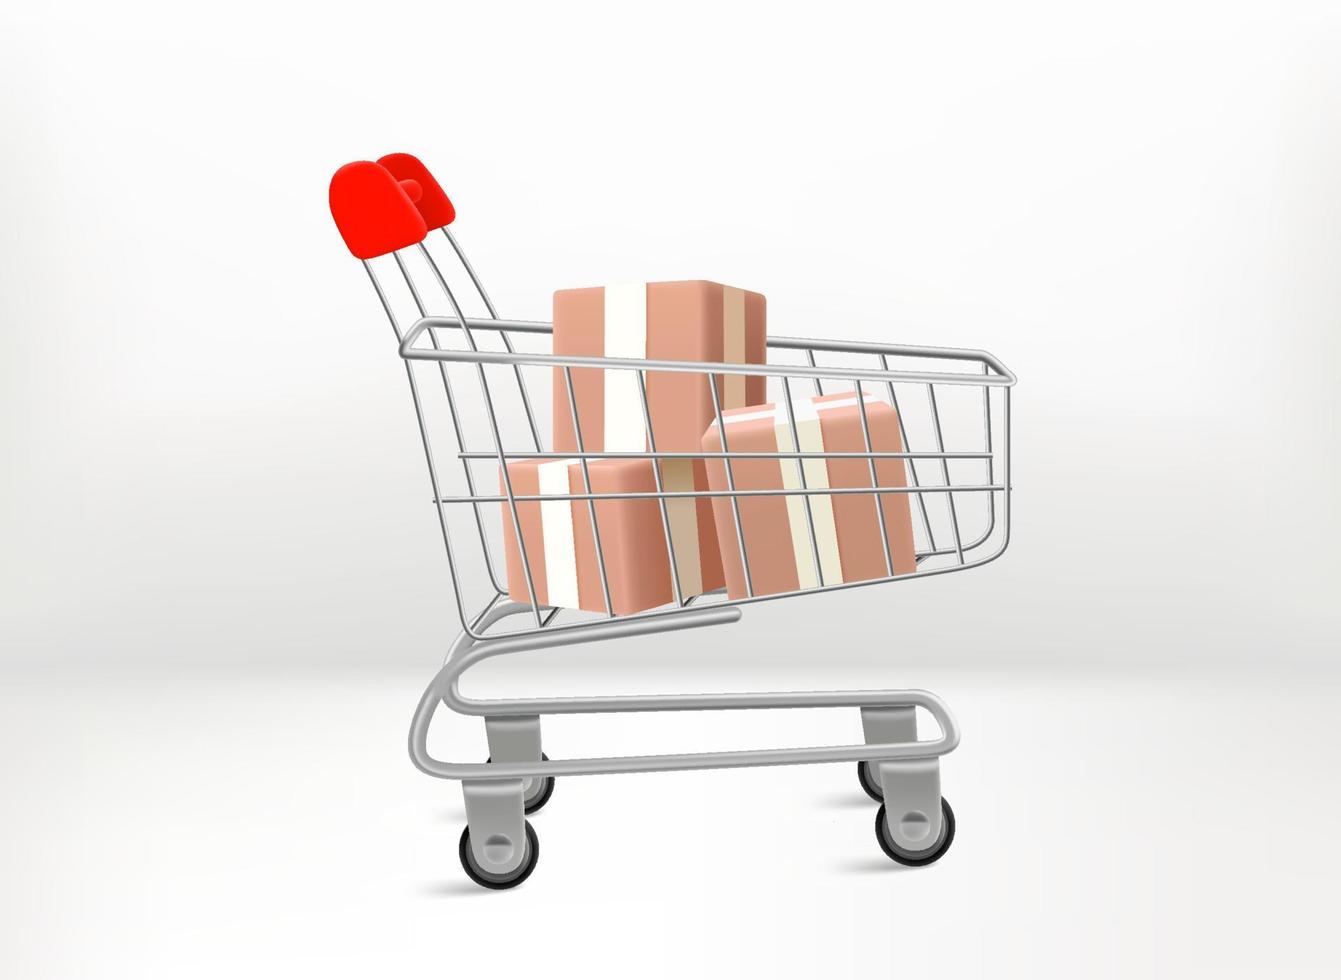 Supermarket shopping cart with boxes. 3d vector illustration